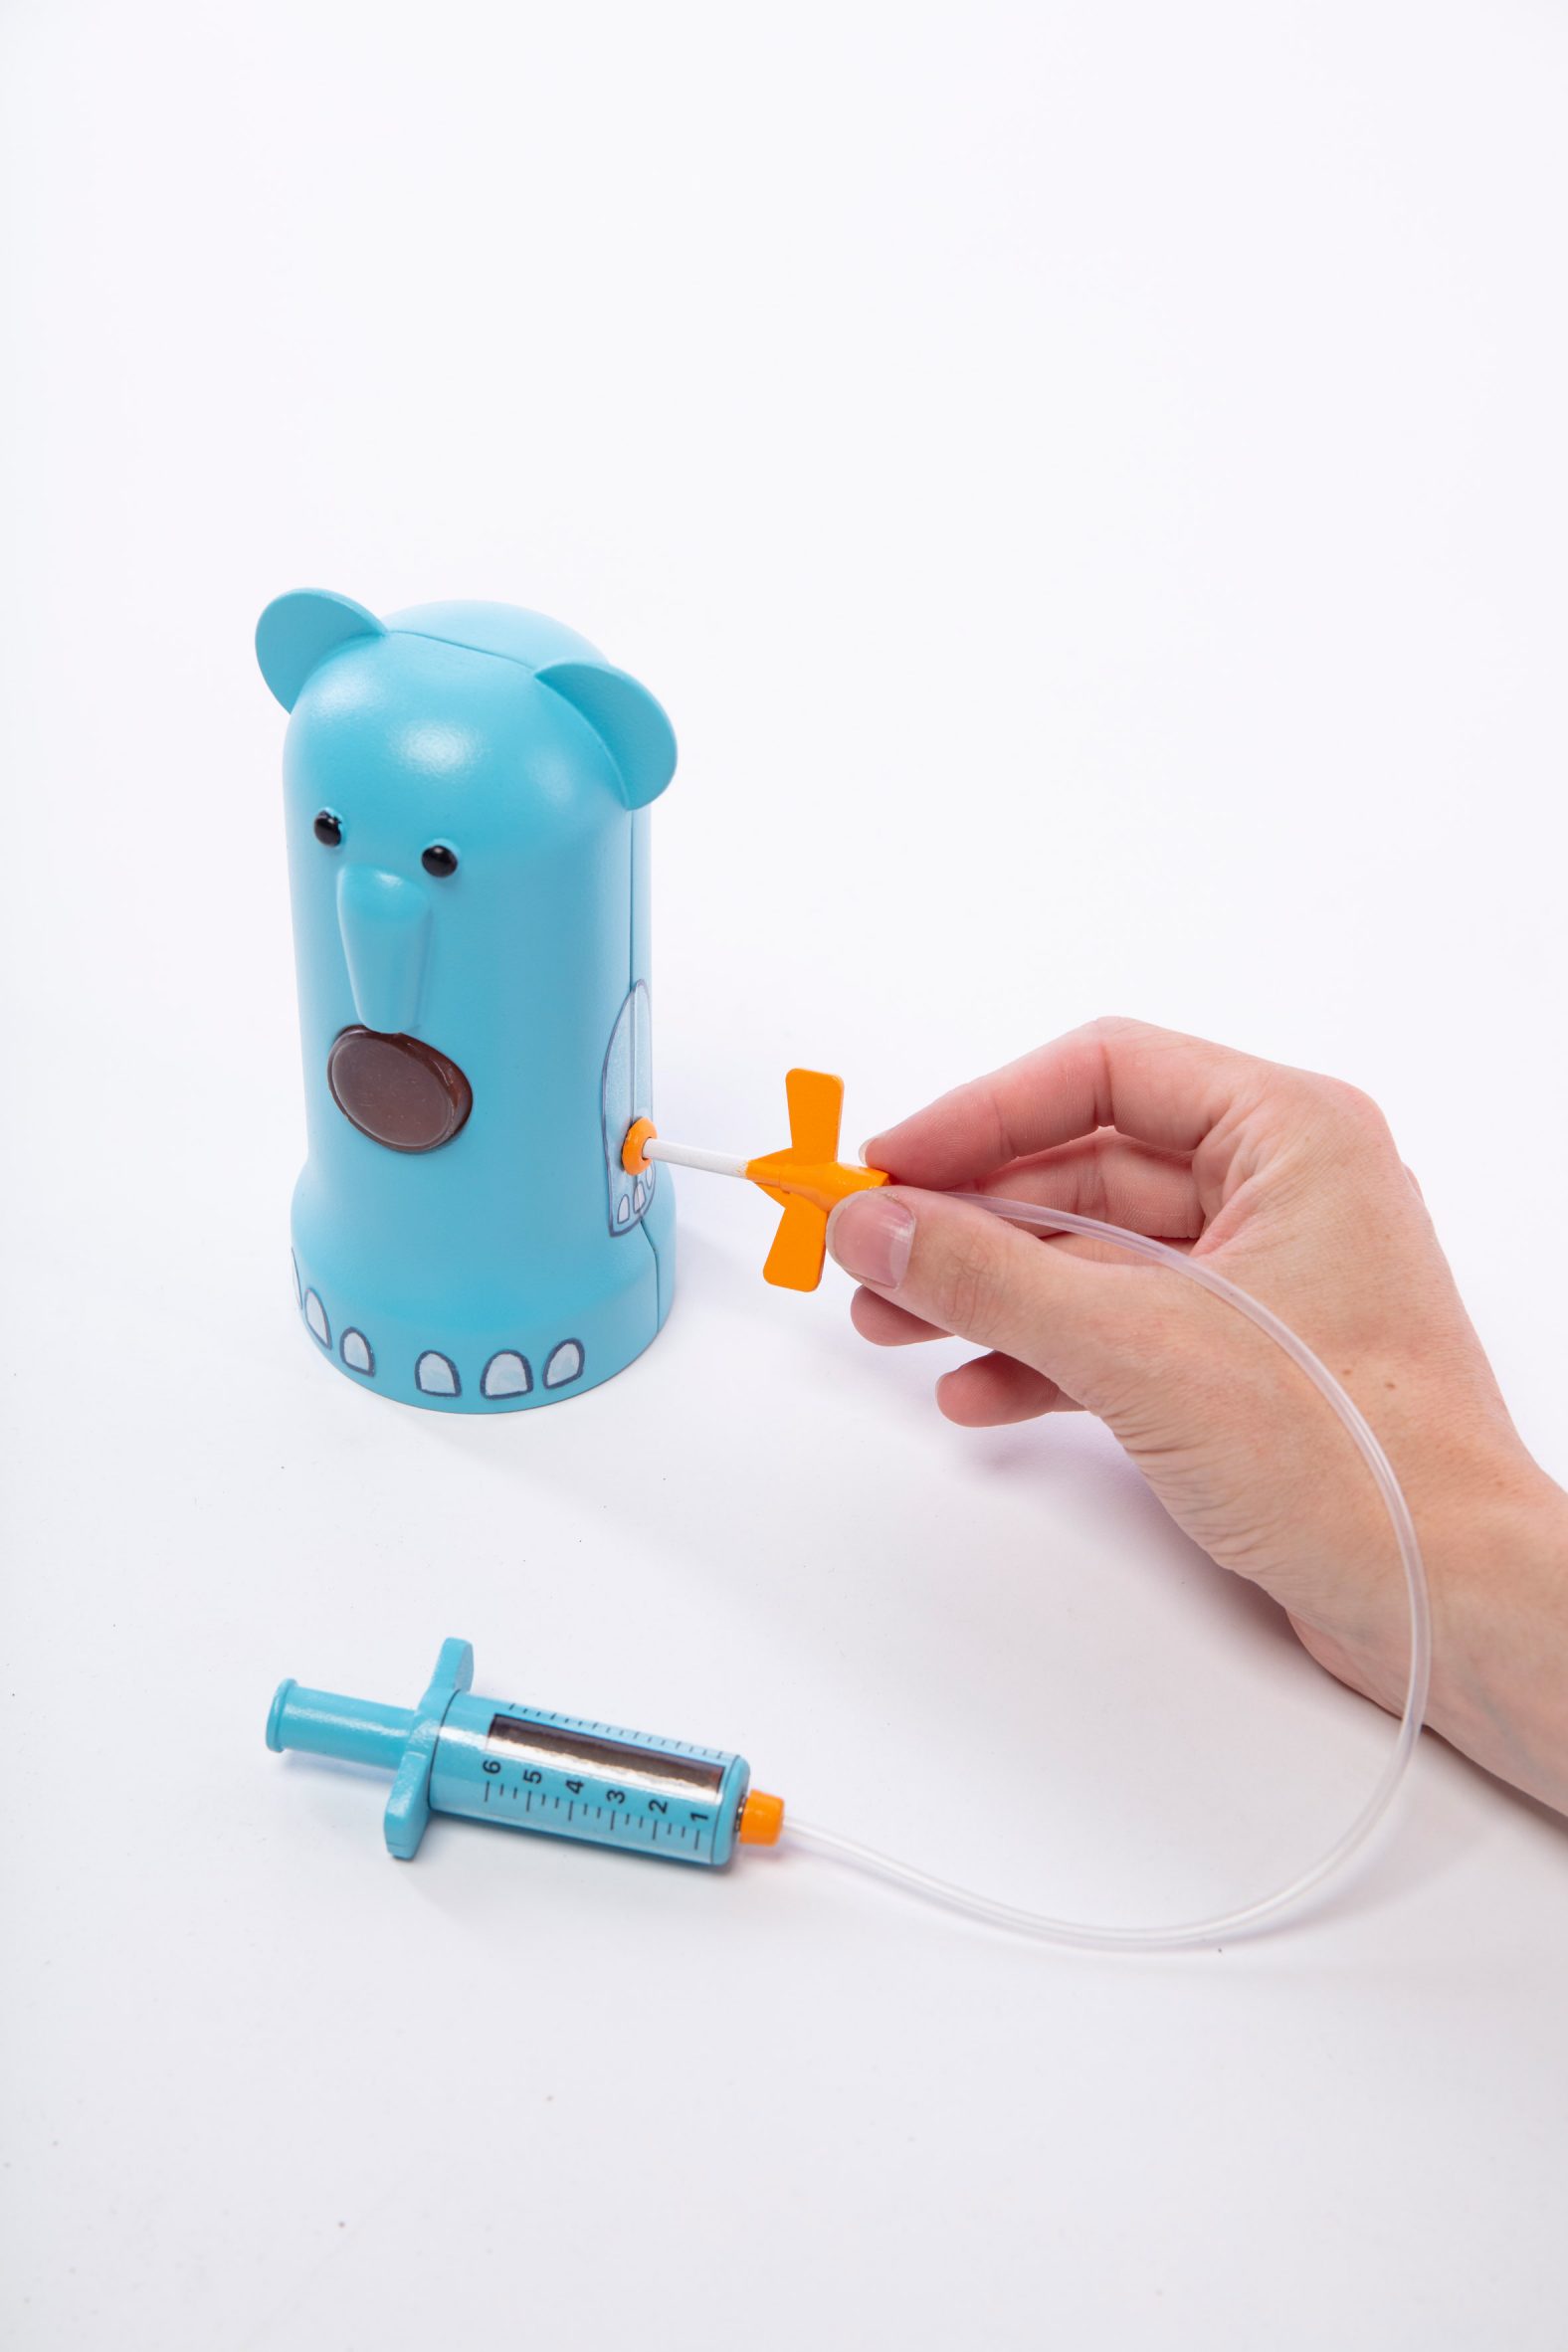 Photograph showing children's toy with mock syringe, tube and blue bear